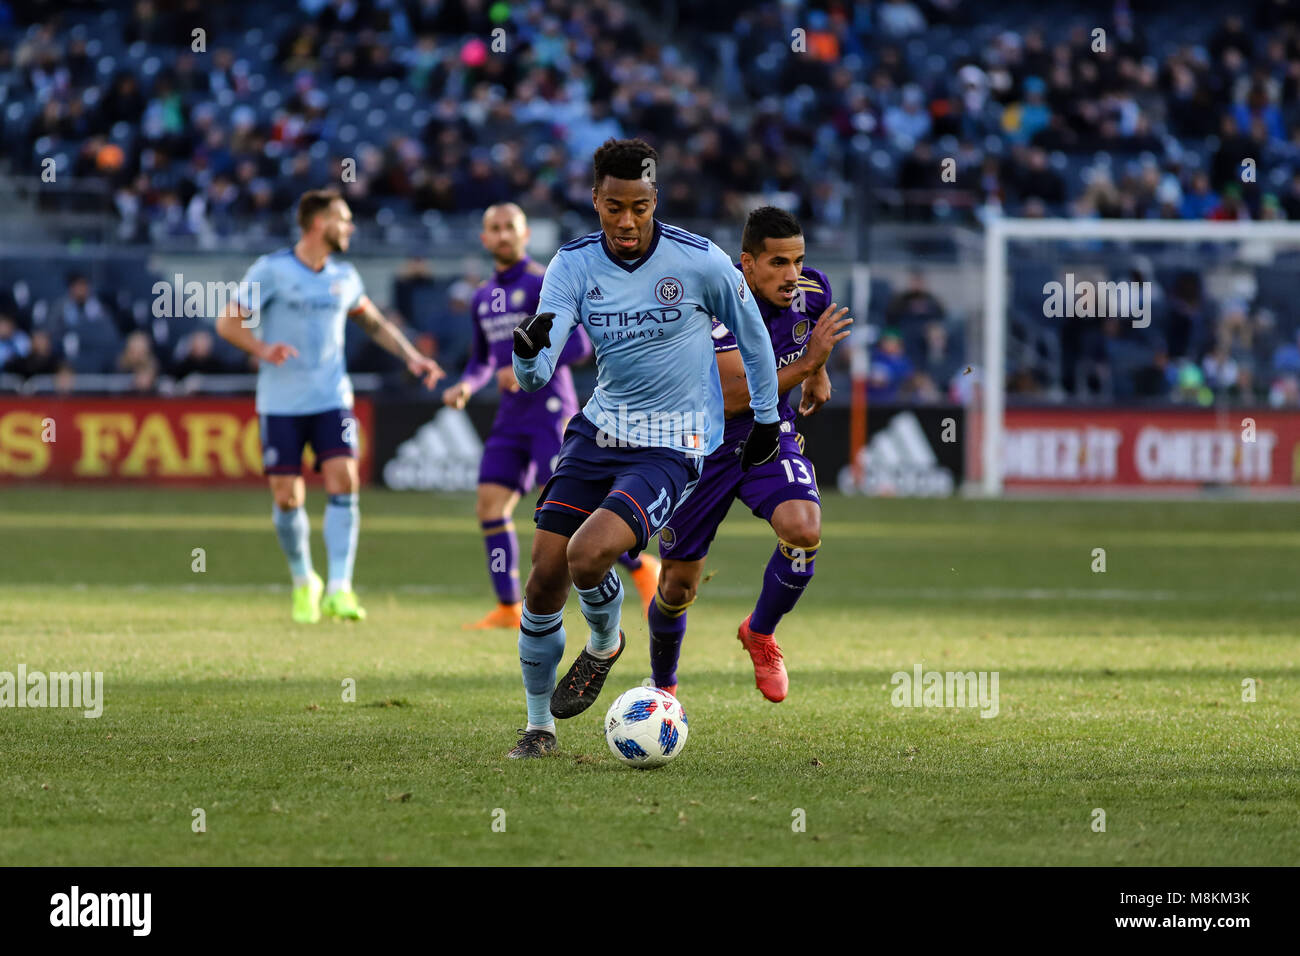 NYCFC vs Orlando City SC action at Yankee Stadium on 17th March 2018. NYCFC won 2-0. Saad Abdul-Salaam (13) dribbles up the pitch. Stock Photo